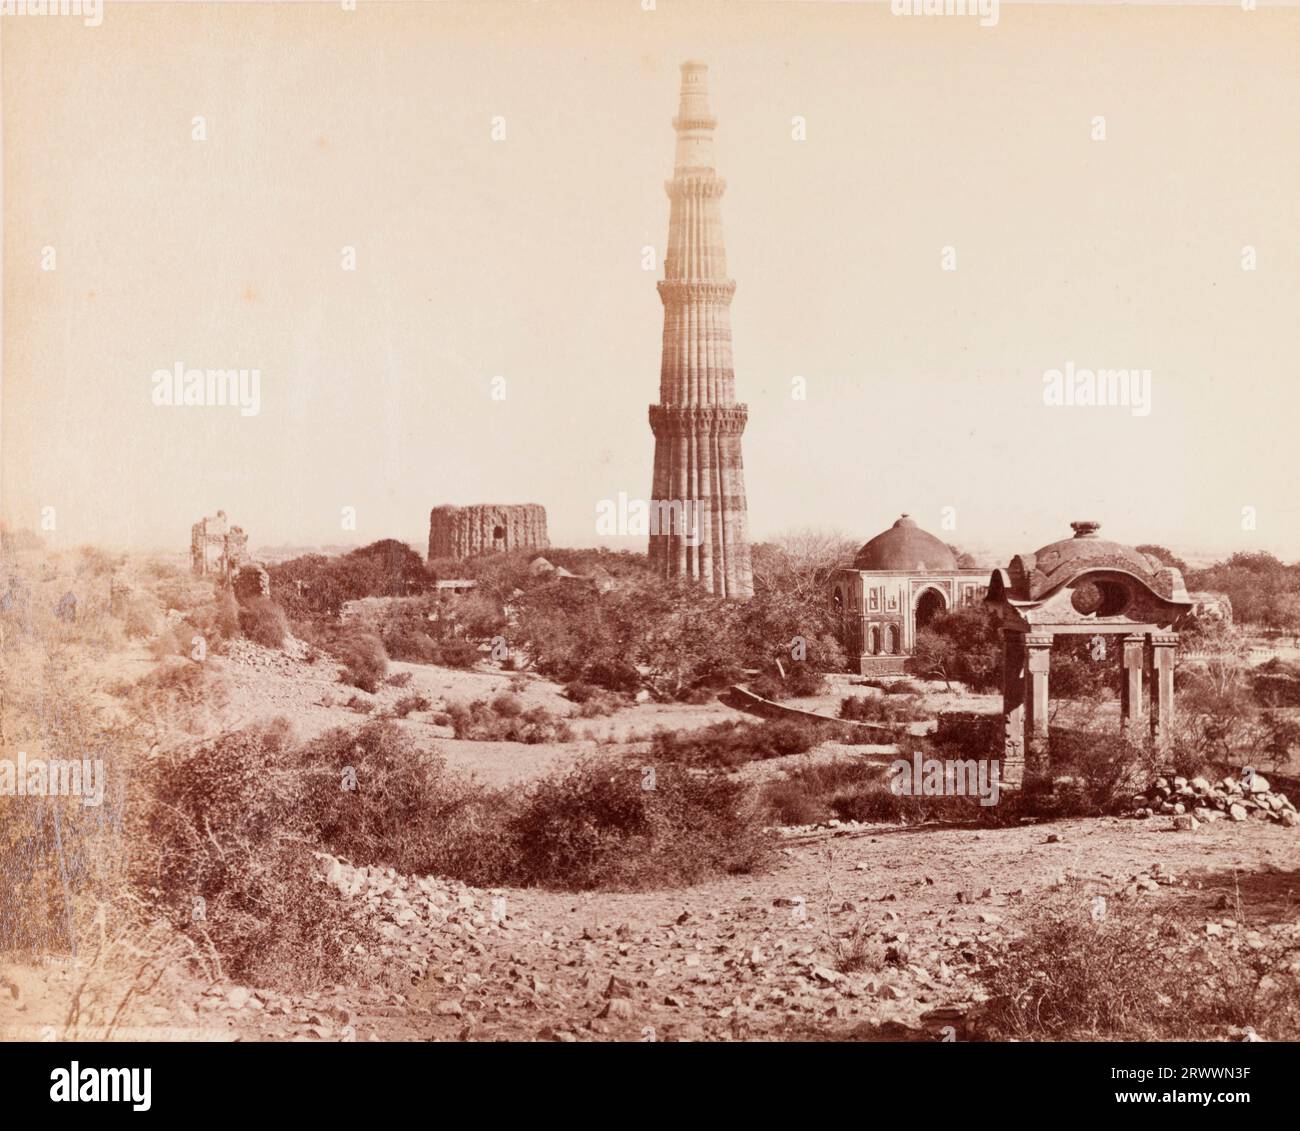 View of the Qutub Minar. At 72.5 metres tall, this was built as a celebratory victory tower to accompany the Quwwat-ul-Islam mosque. The scene shows the victory minaret surrounded by ruins. Inscribed on negative: Frith's Series. 3124 Kutub Minar: Delhi. Caption reads: Kutub Minar & Ruins, Delhi. Stock Photo